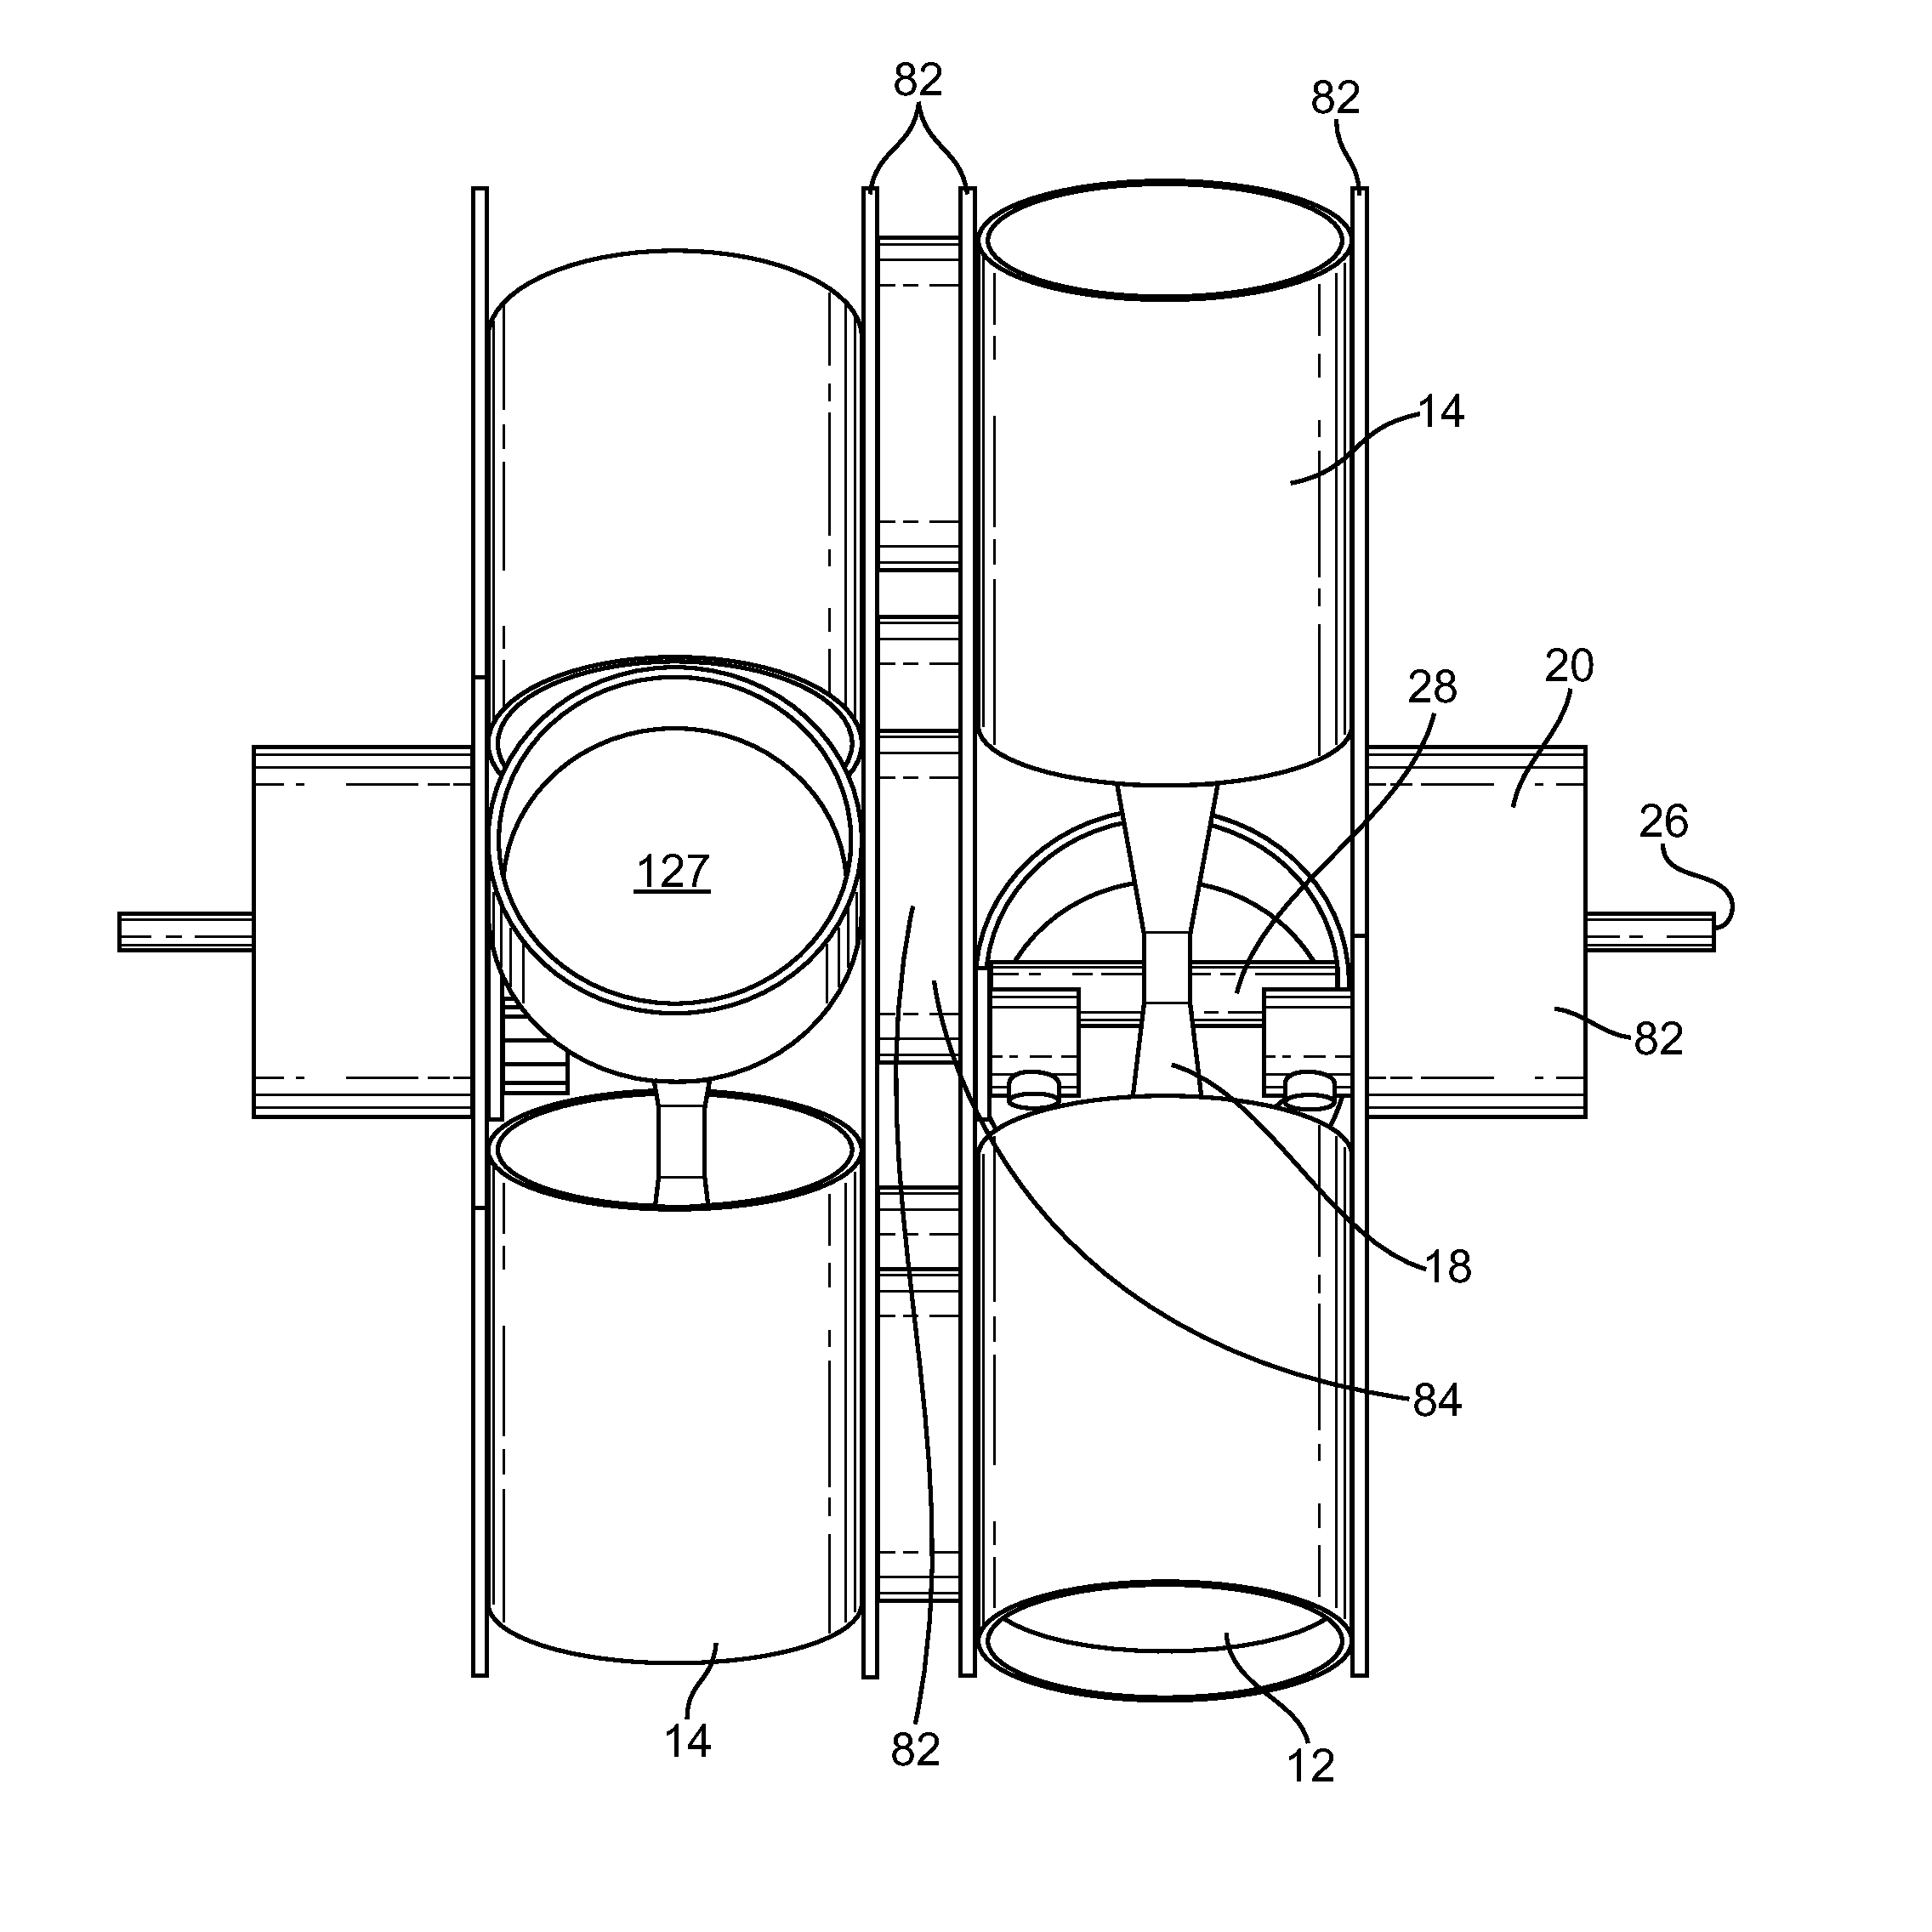 Radial internal combustion engine with different stroke volumes